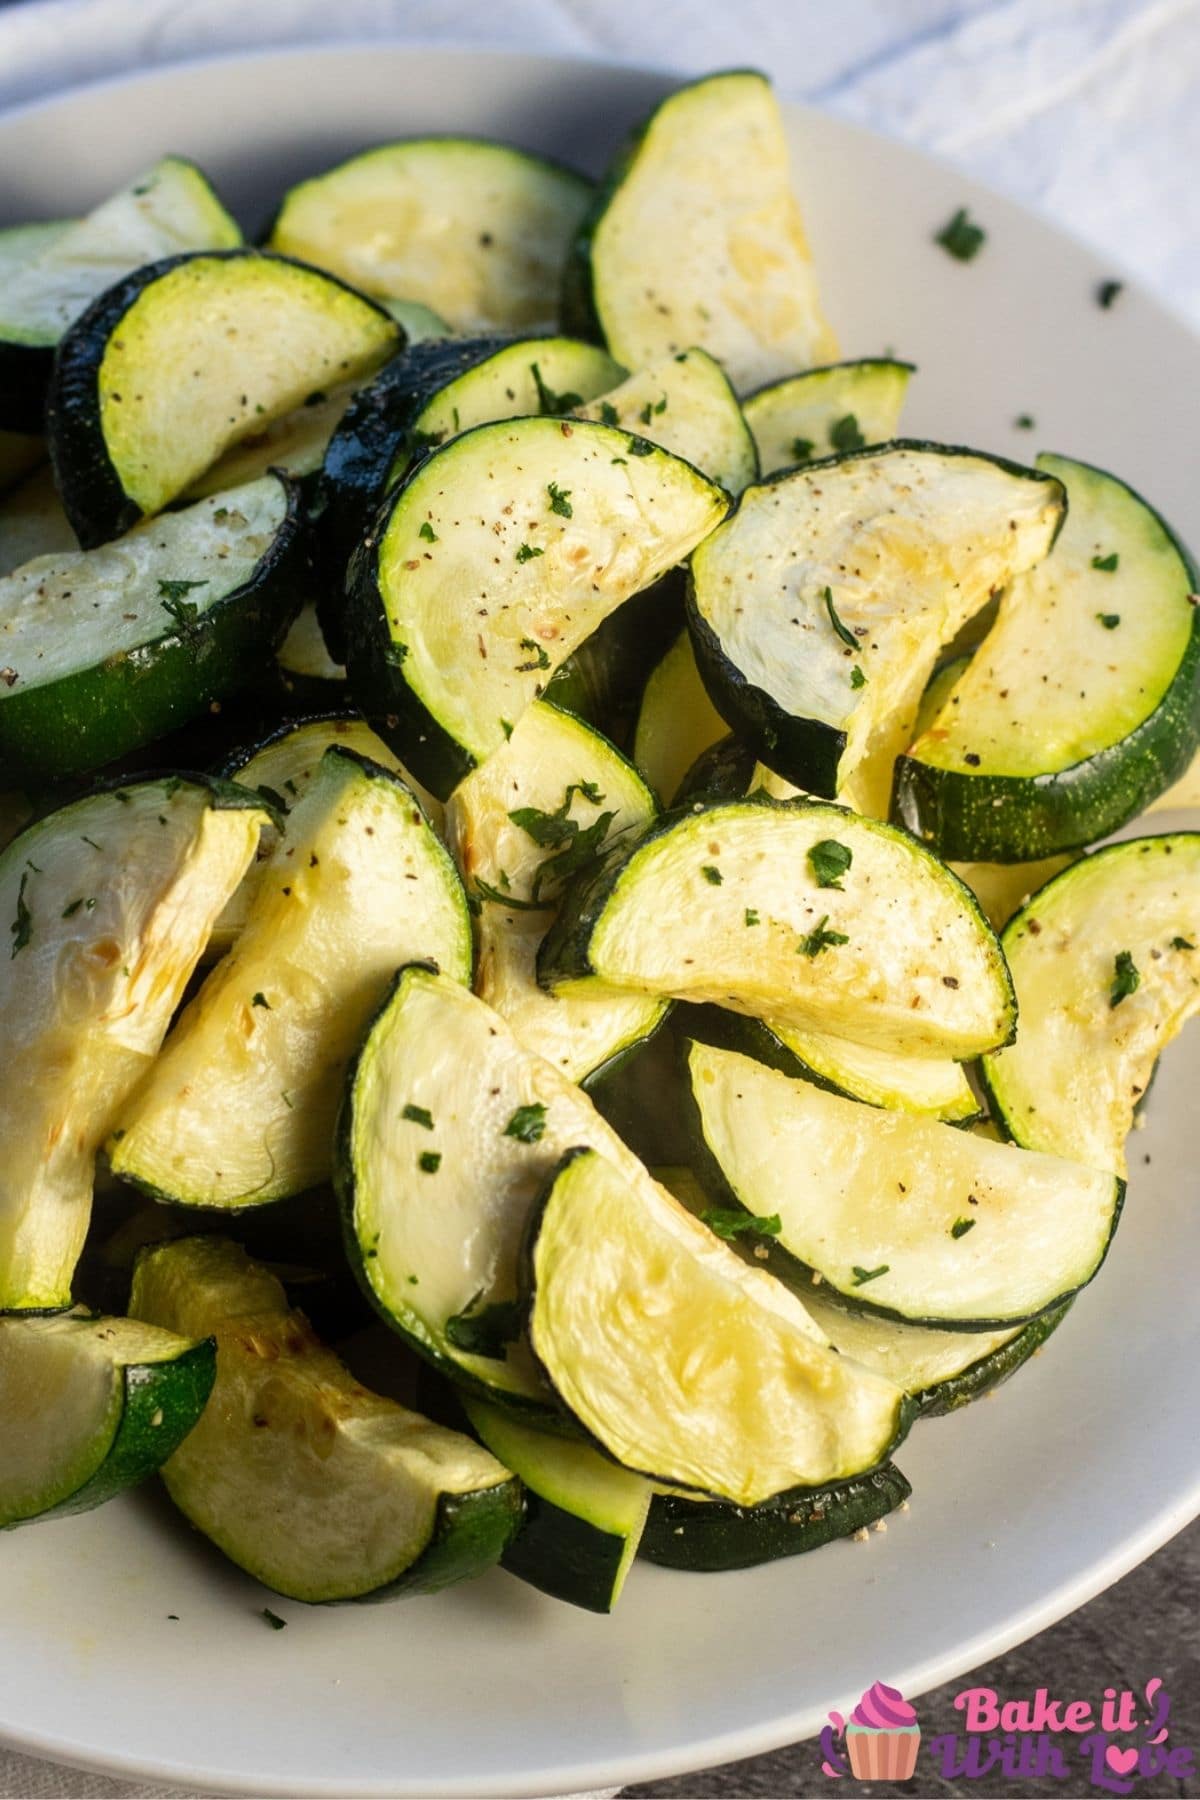 Air fryer zucchini plated on white plate with parsley garnish.